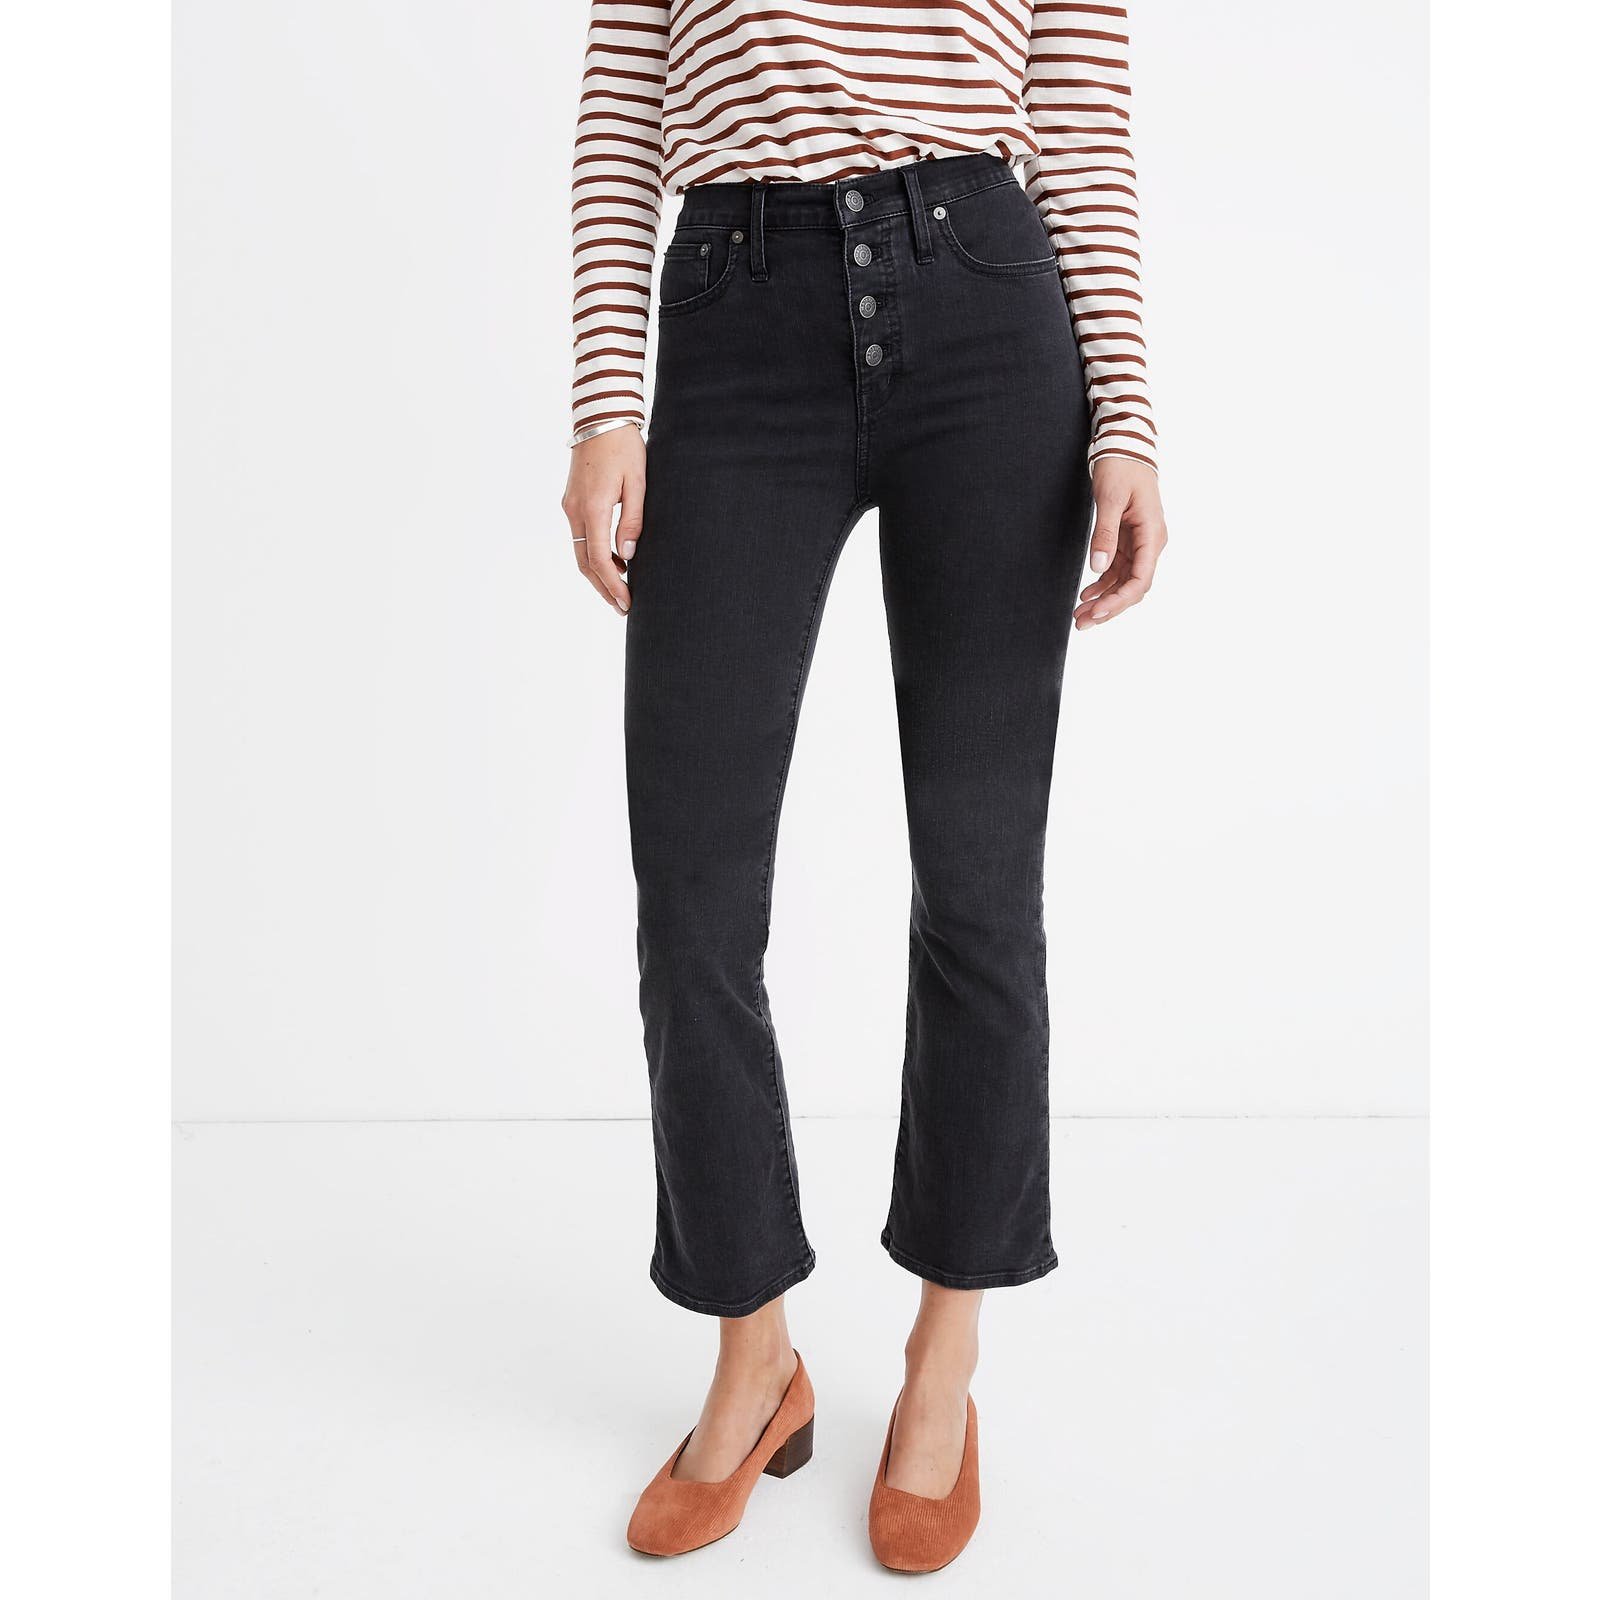 Beautiful Madewell Cali Demi Boot Jeans in Bellspring Wash Button Front Edition IwWskUBvn Everyday Low Prices